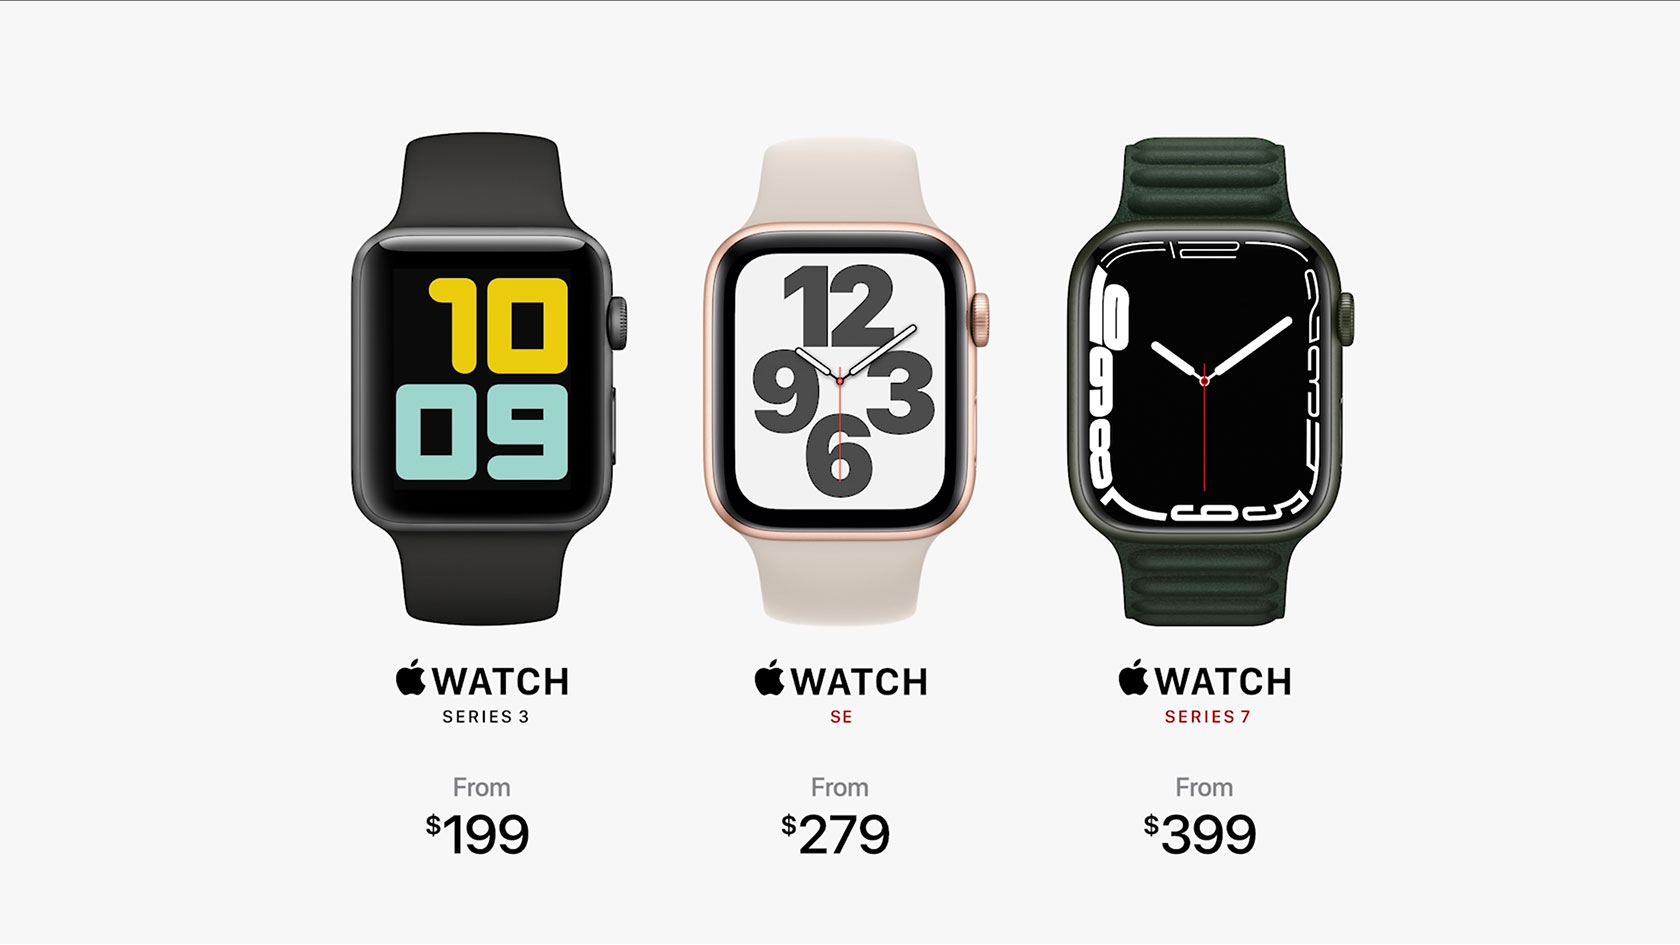 The apple watch series • Compare & see prices now »